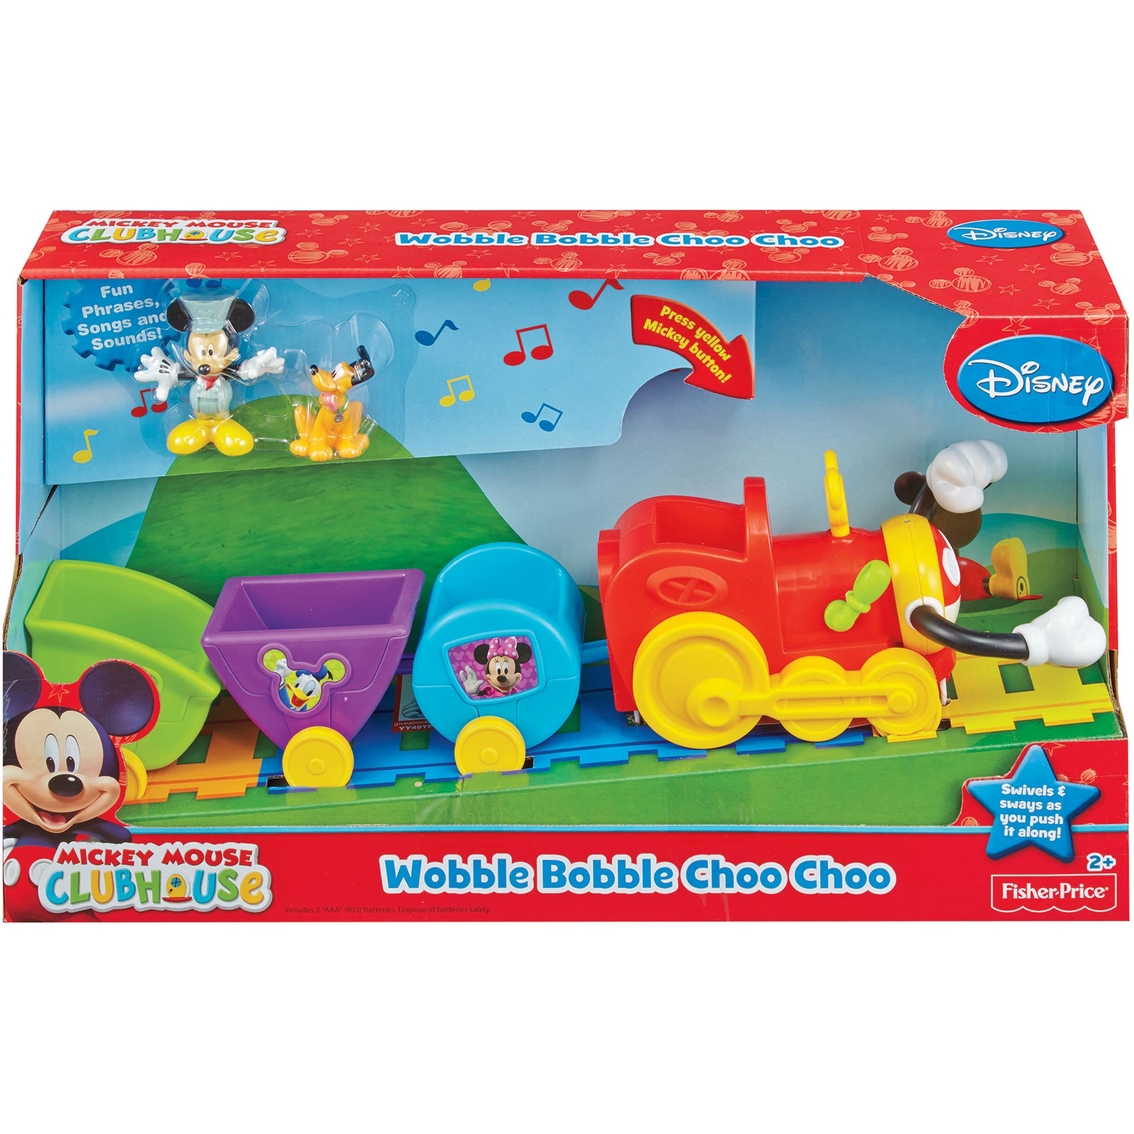 Mickey Mouse Clubhouse: Choo-Choo Express